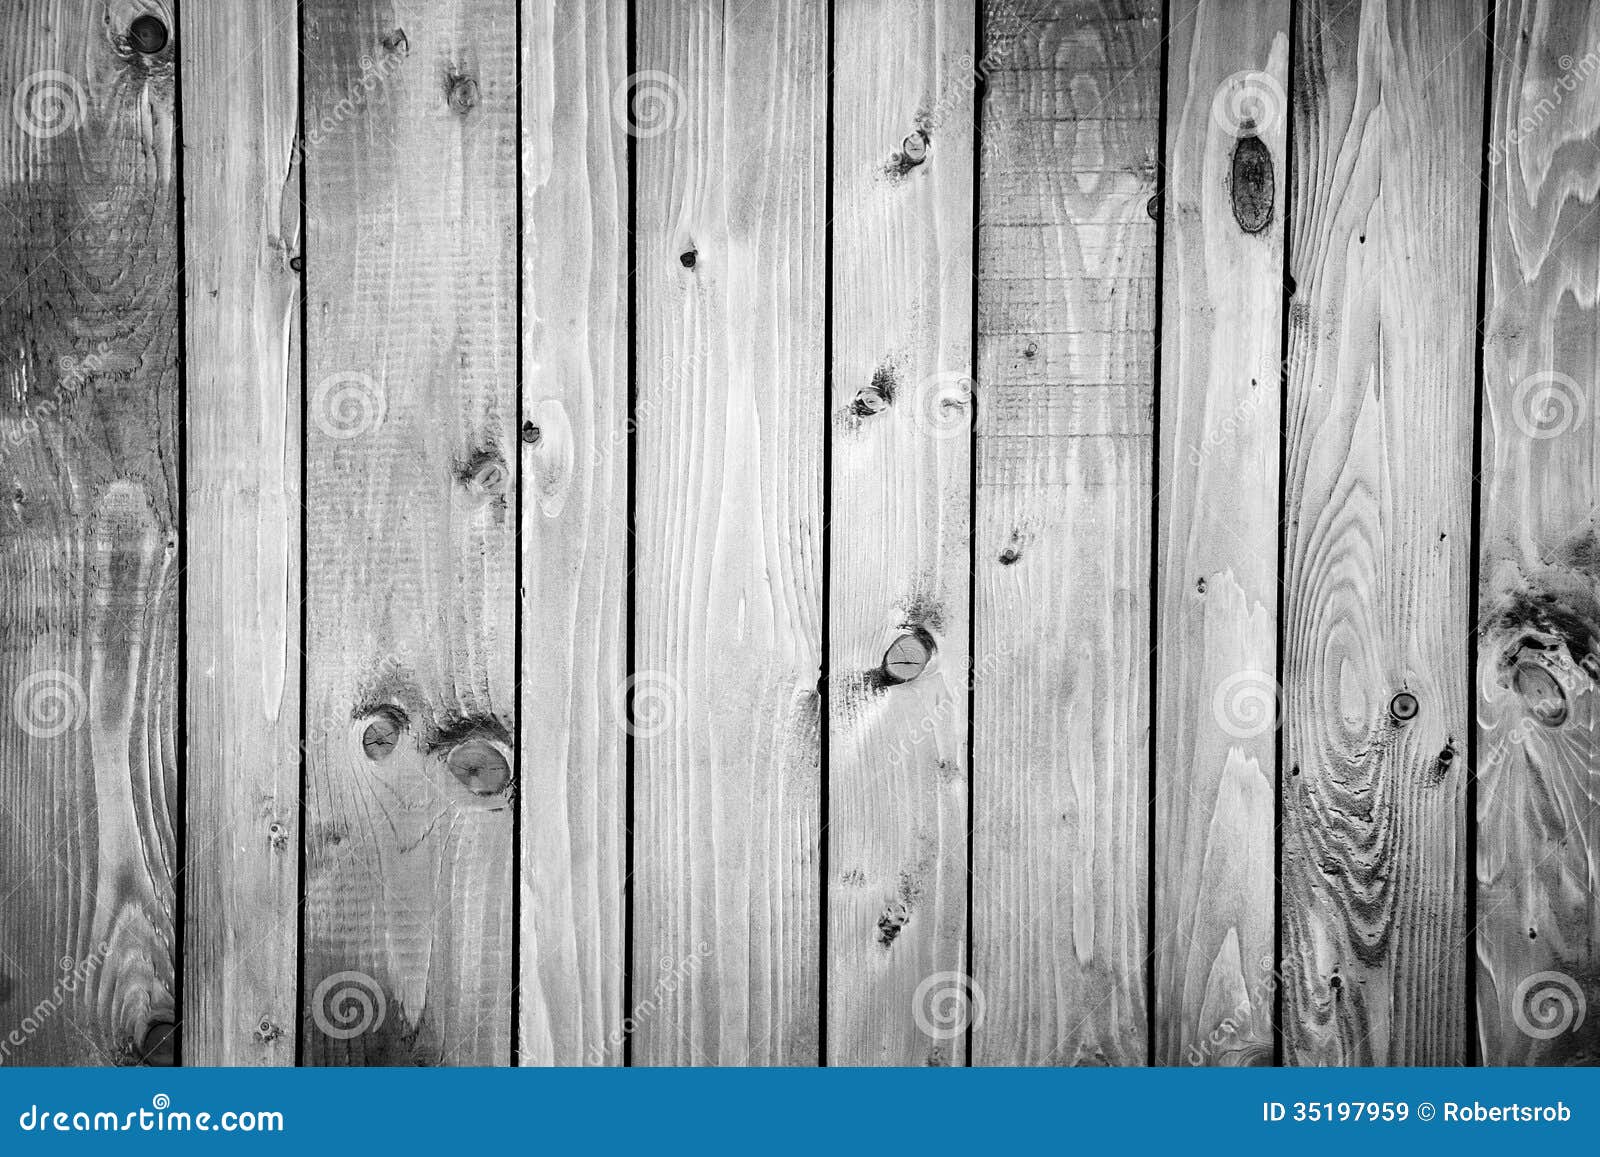 The grey wood texture with natural patterns background.